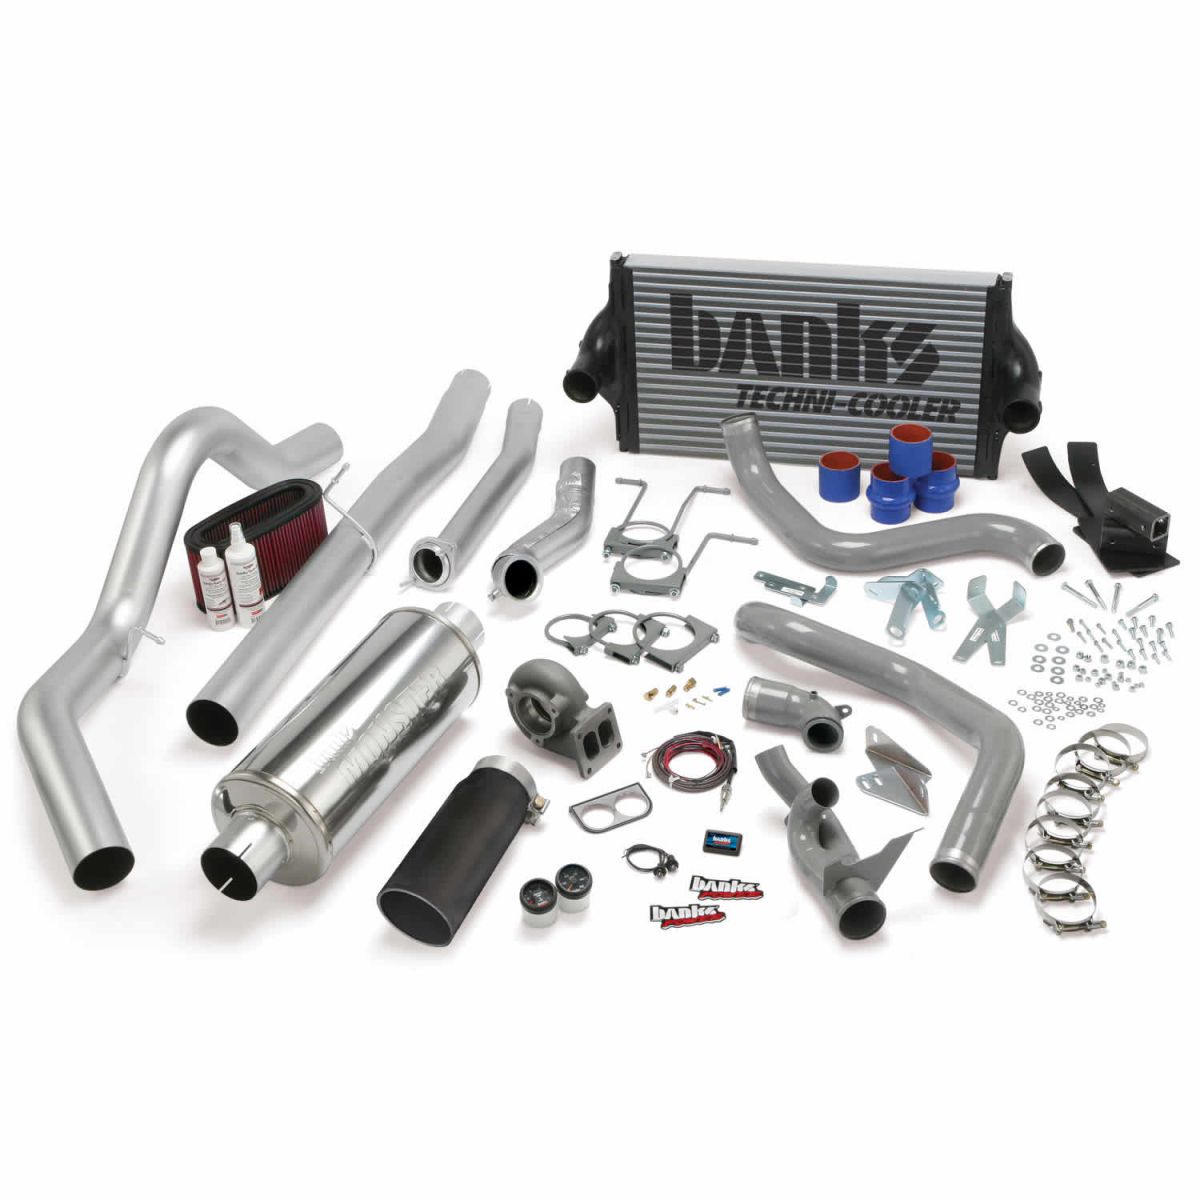 Banks Power - Banks Power PowerPack Bundle Complete Power System W/OttoMind Engine Calibration Module Black Tail Pipe 94-97 Ford 7.3L CCLB Manual Transmission